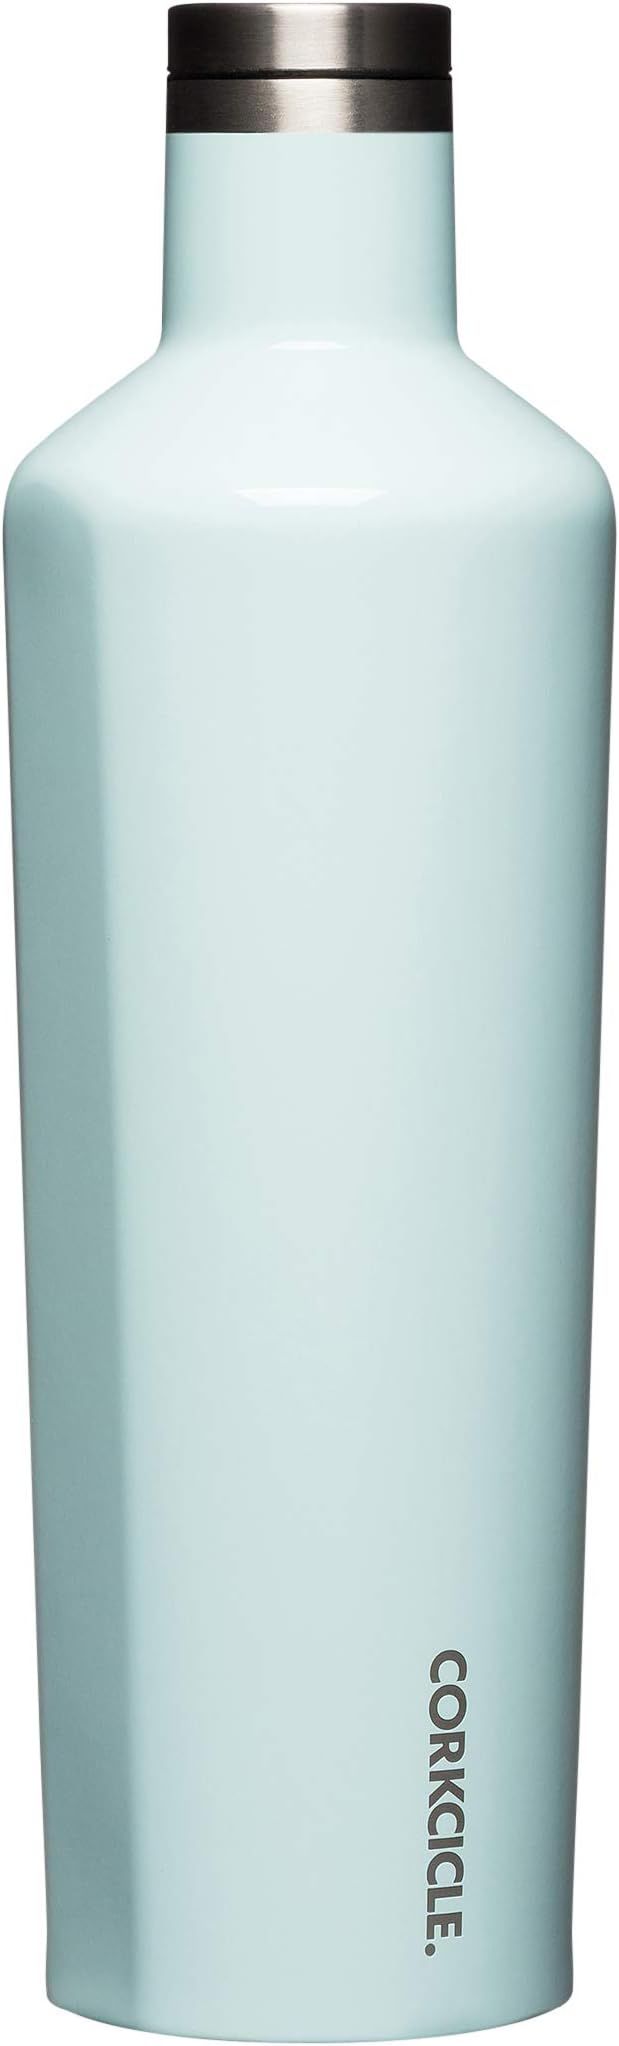 Corkcicle Canteen 25 oz Insulated Stainless Steel Bottle, Gloss Powder Blue | Amazon (US)